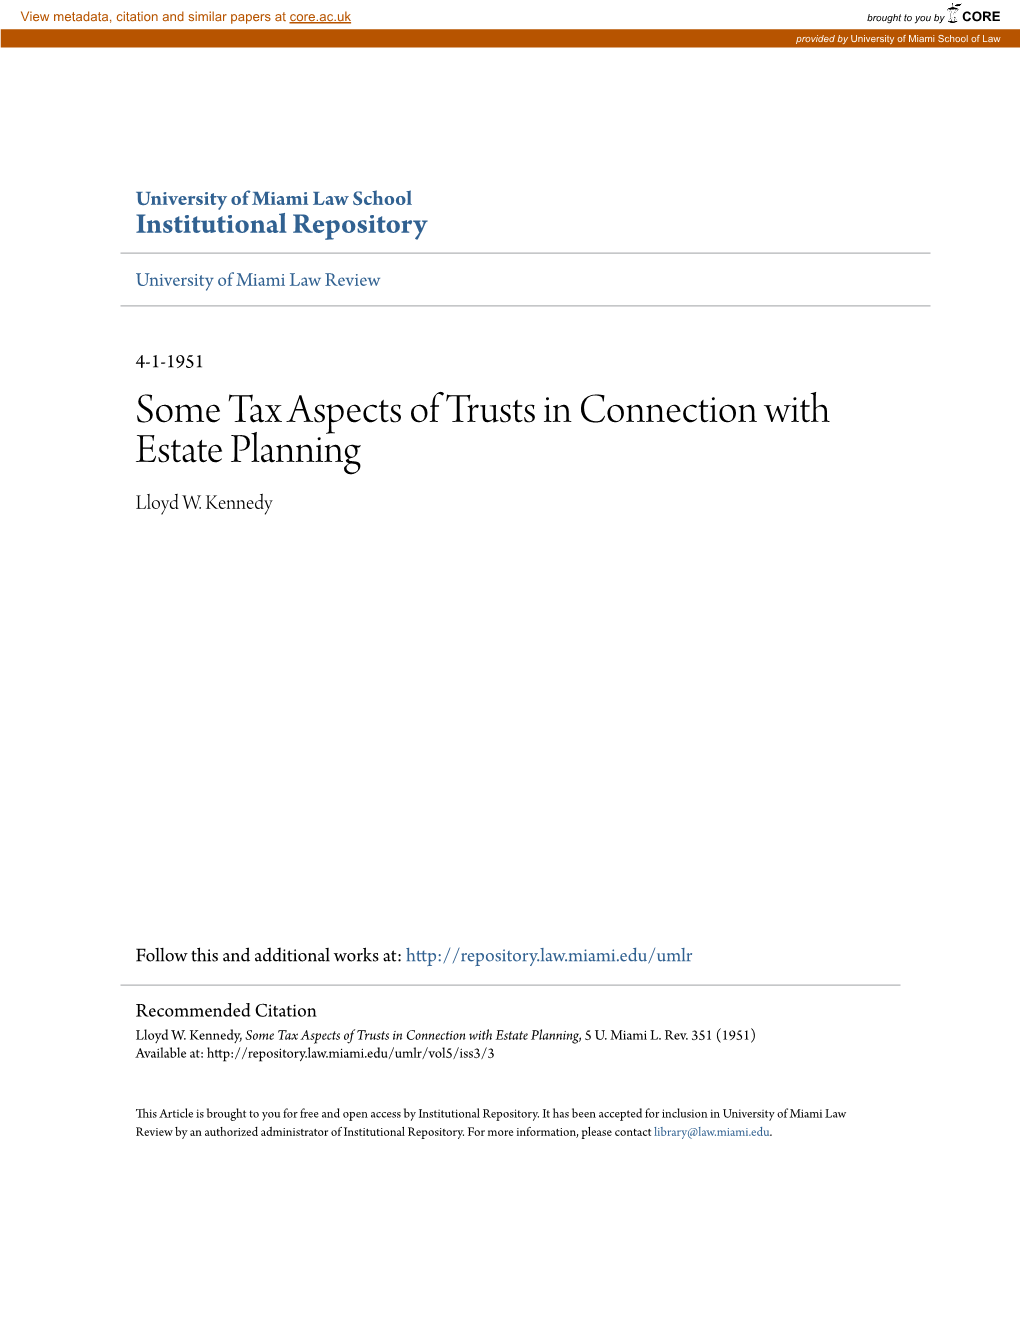 Some Tax Aspects of Trusts in Connection with Estate Planning Lloyd W